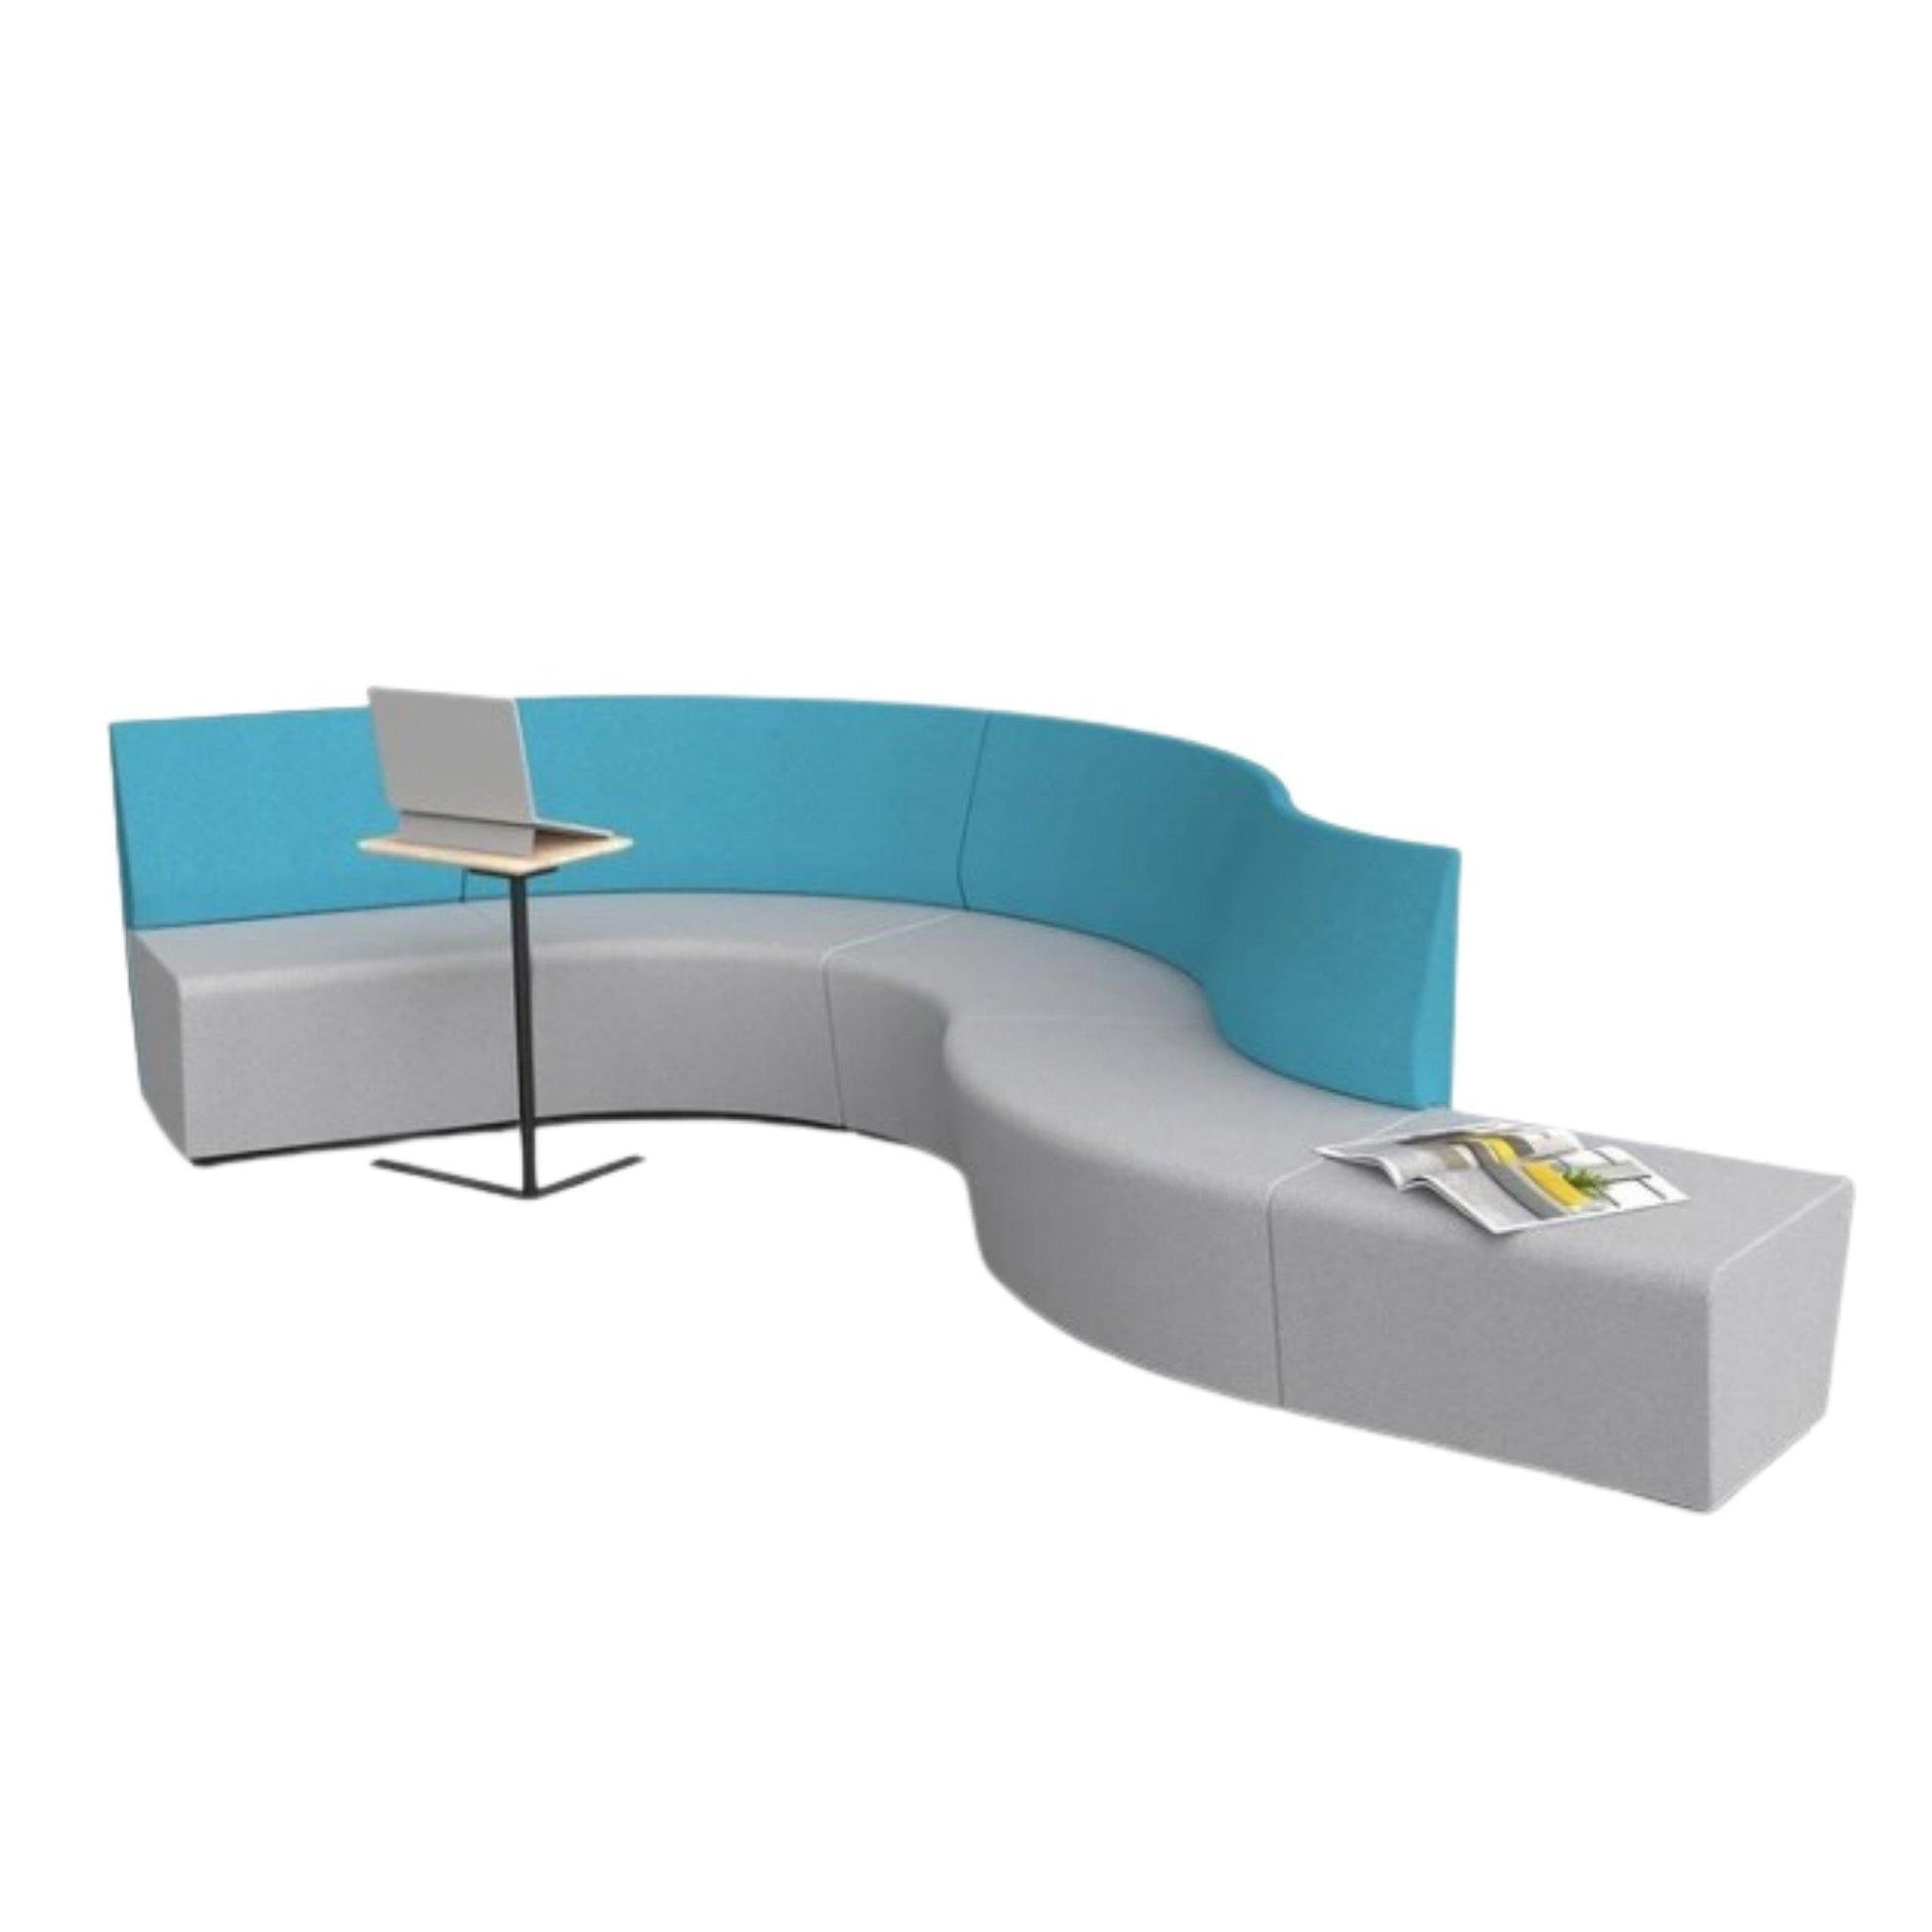 Motion Loop Example One - Office Furniture Company 